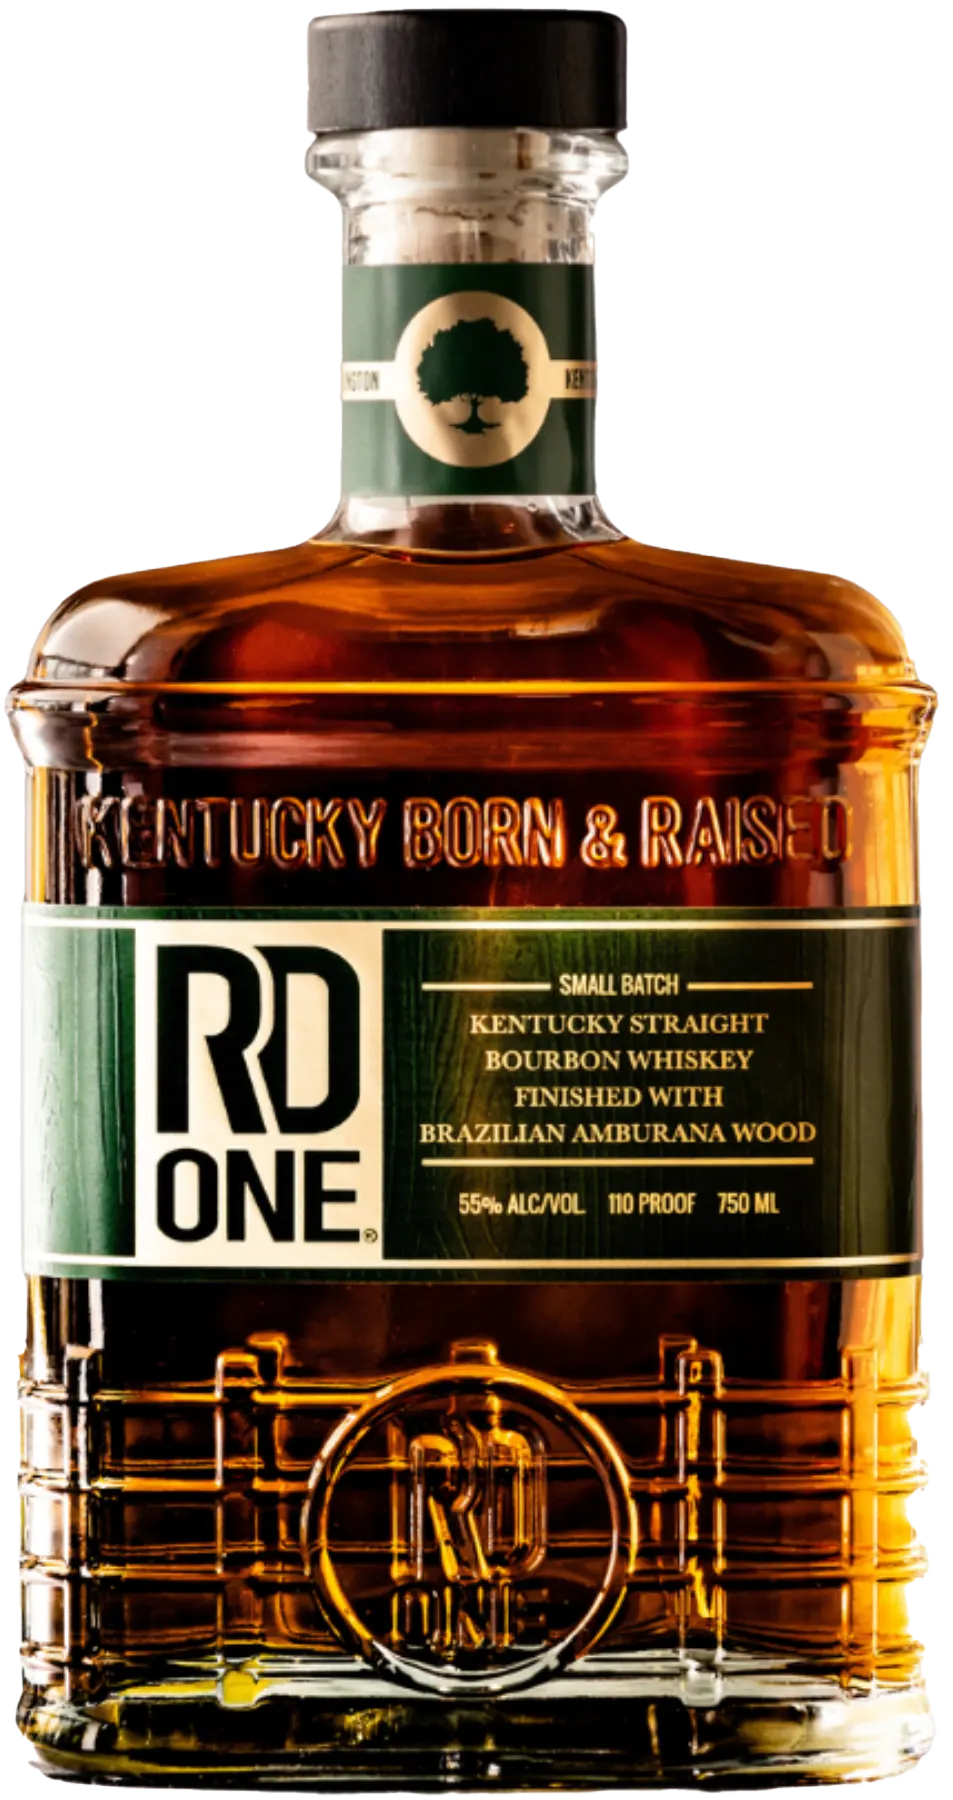 RD1 &quot;Finished with Brazilian Amburana Wood&quot; Kentucky Straight Bourbon Whiskey (RD One)